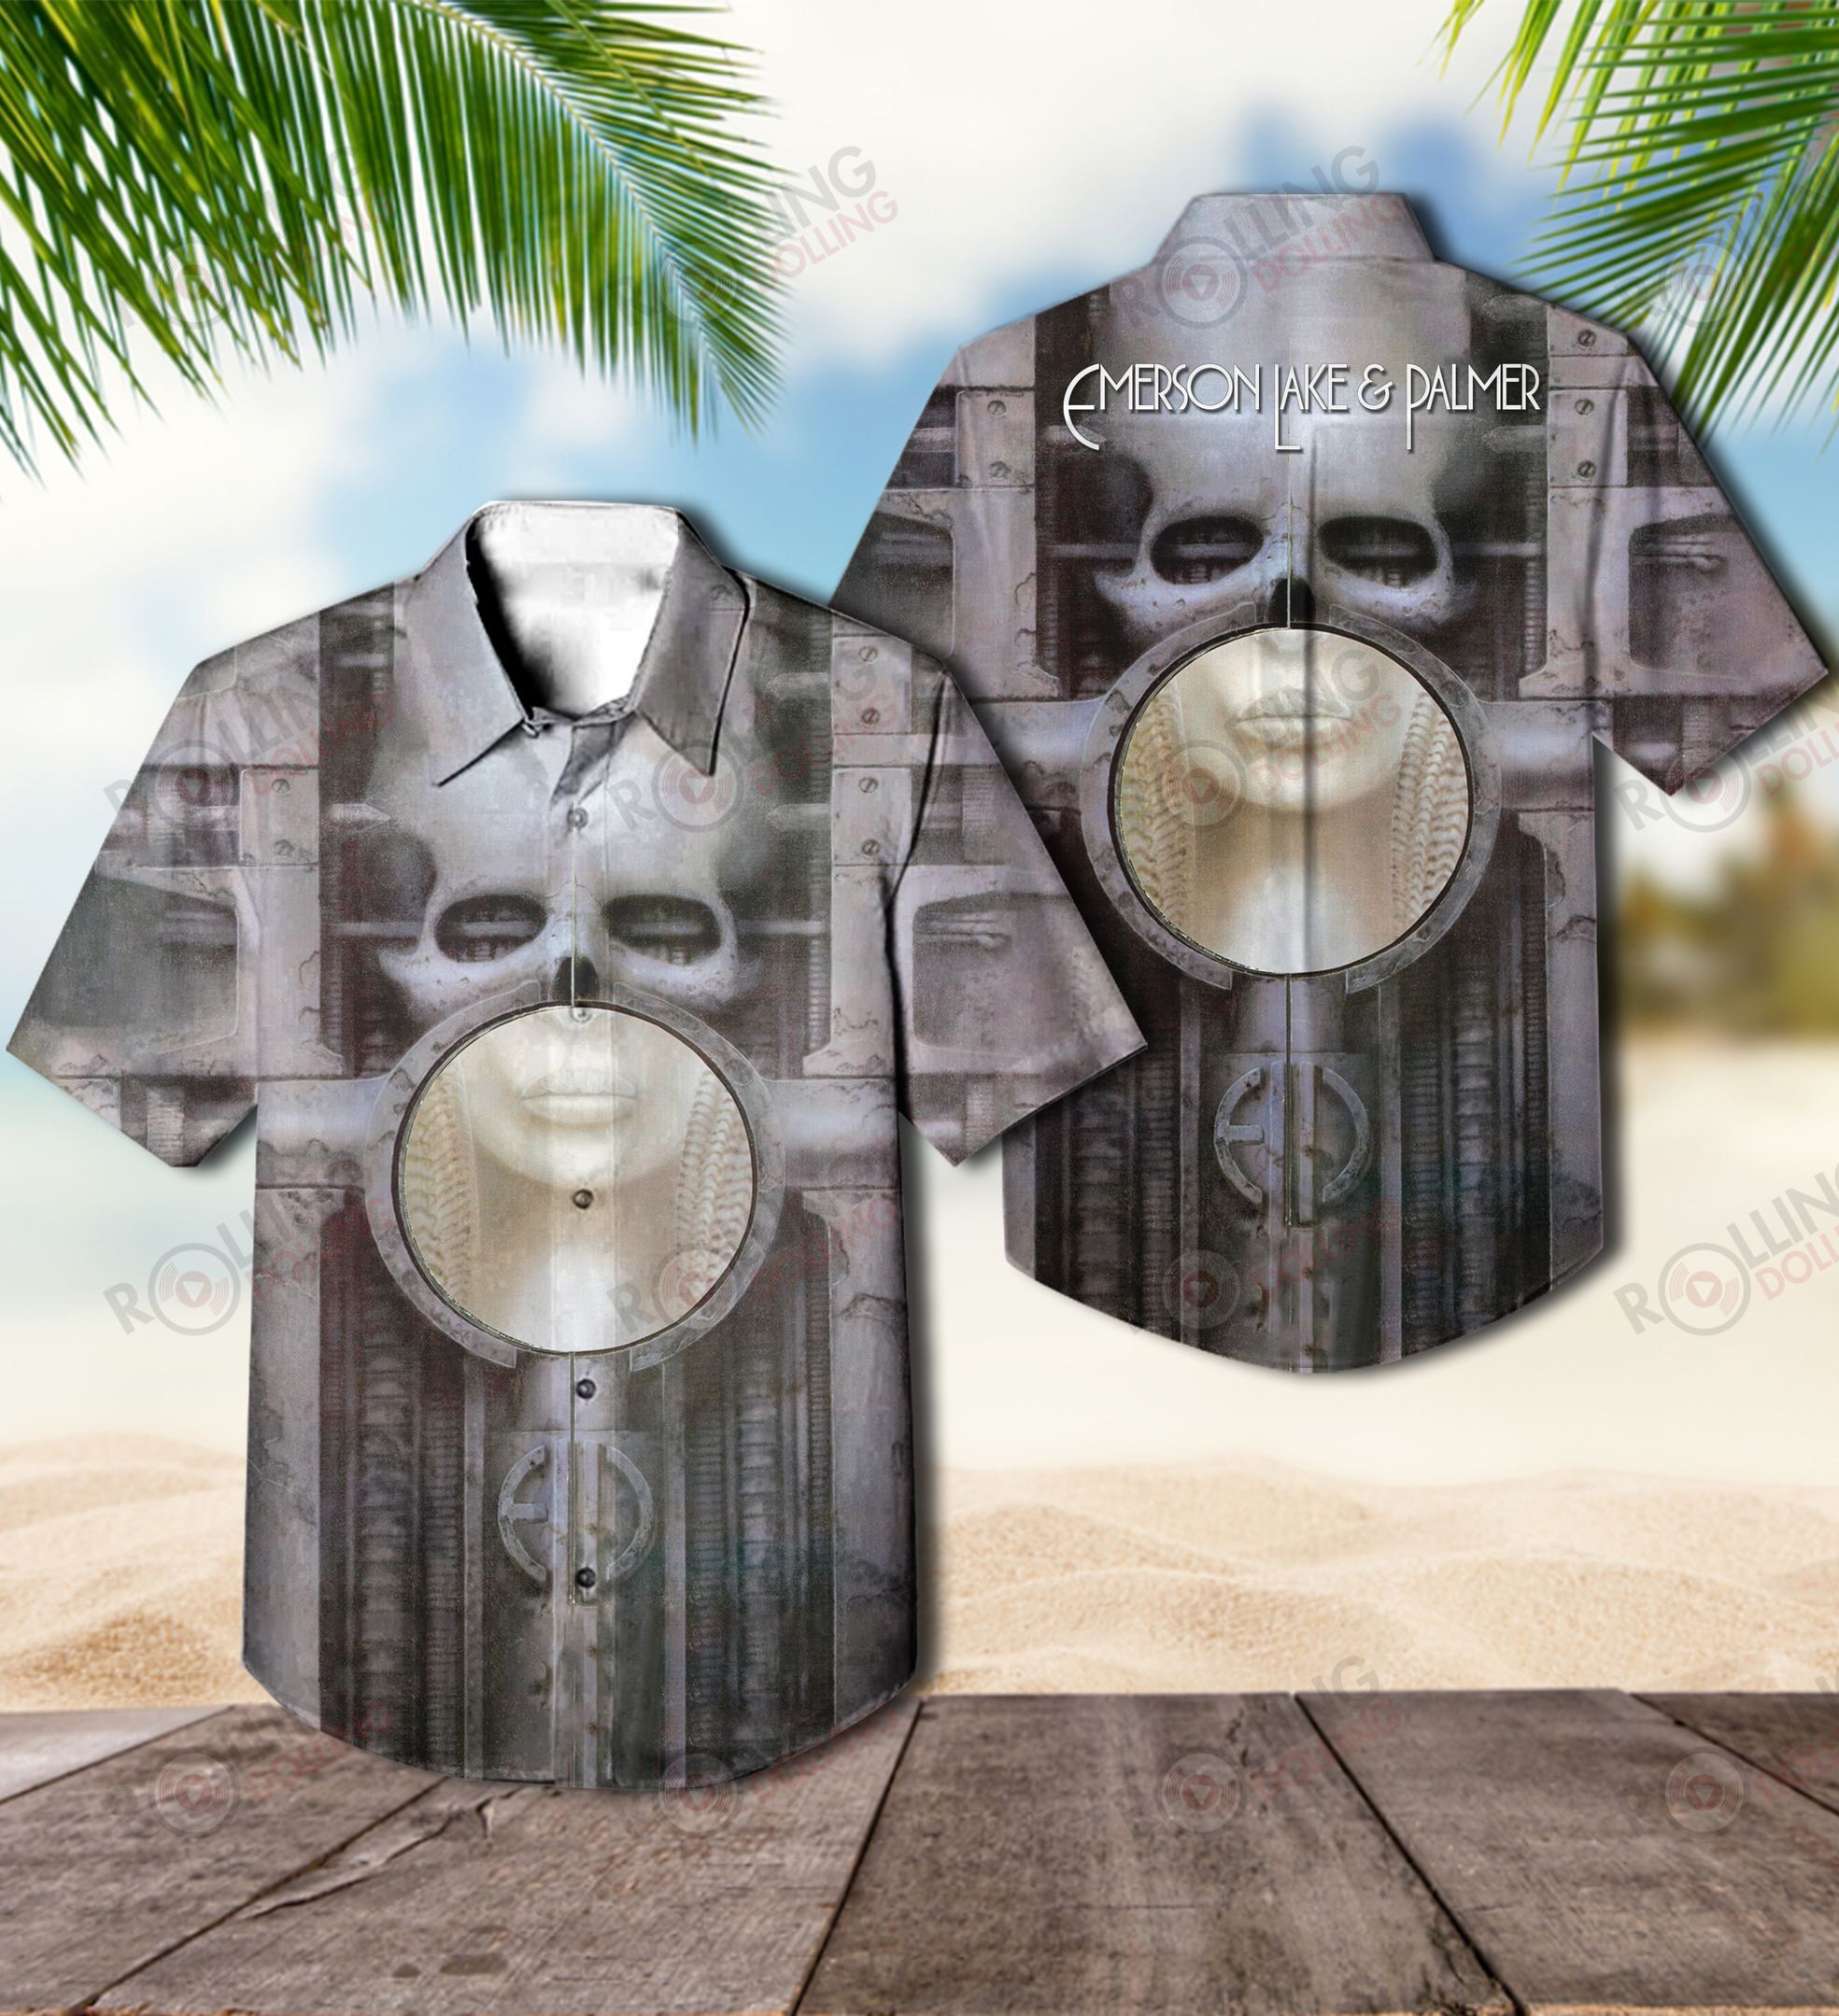 You'll have the perfect vacation outfit with this Hawaiian shirt 133